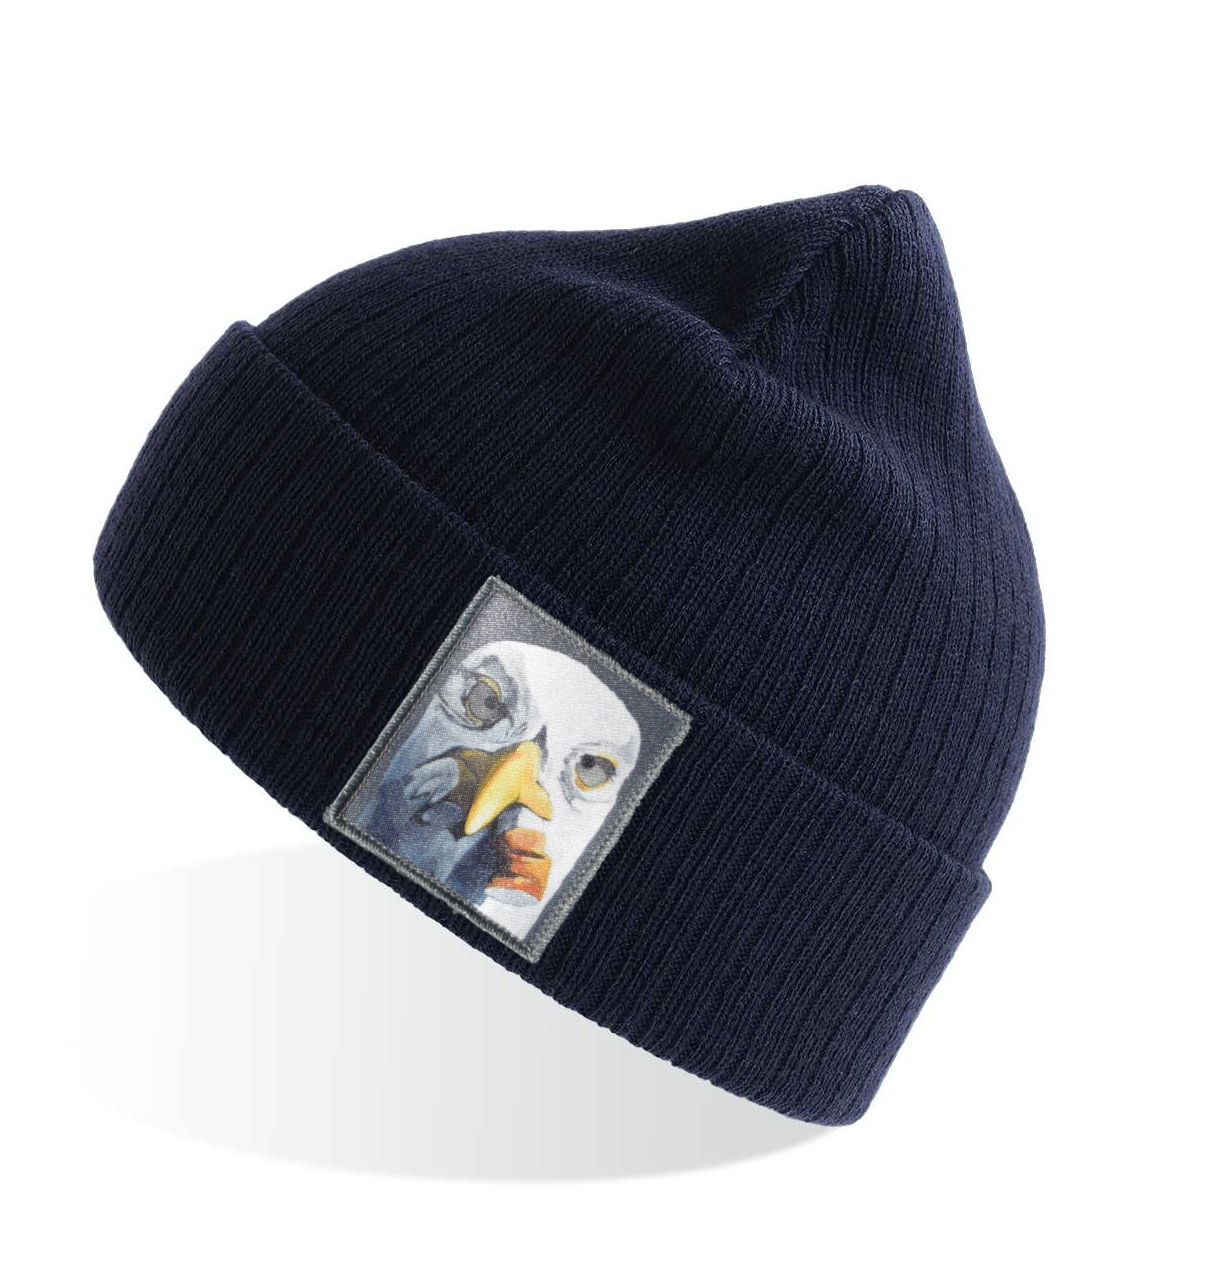 Navy Sustainable Rib Knit Beanie Hats Flyn Costello Seagull with Cig  